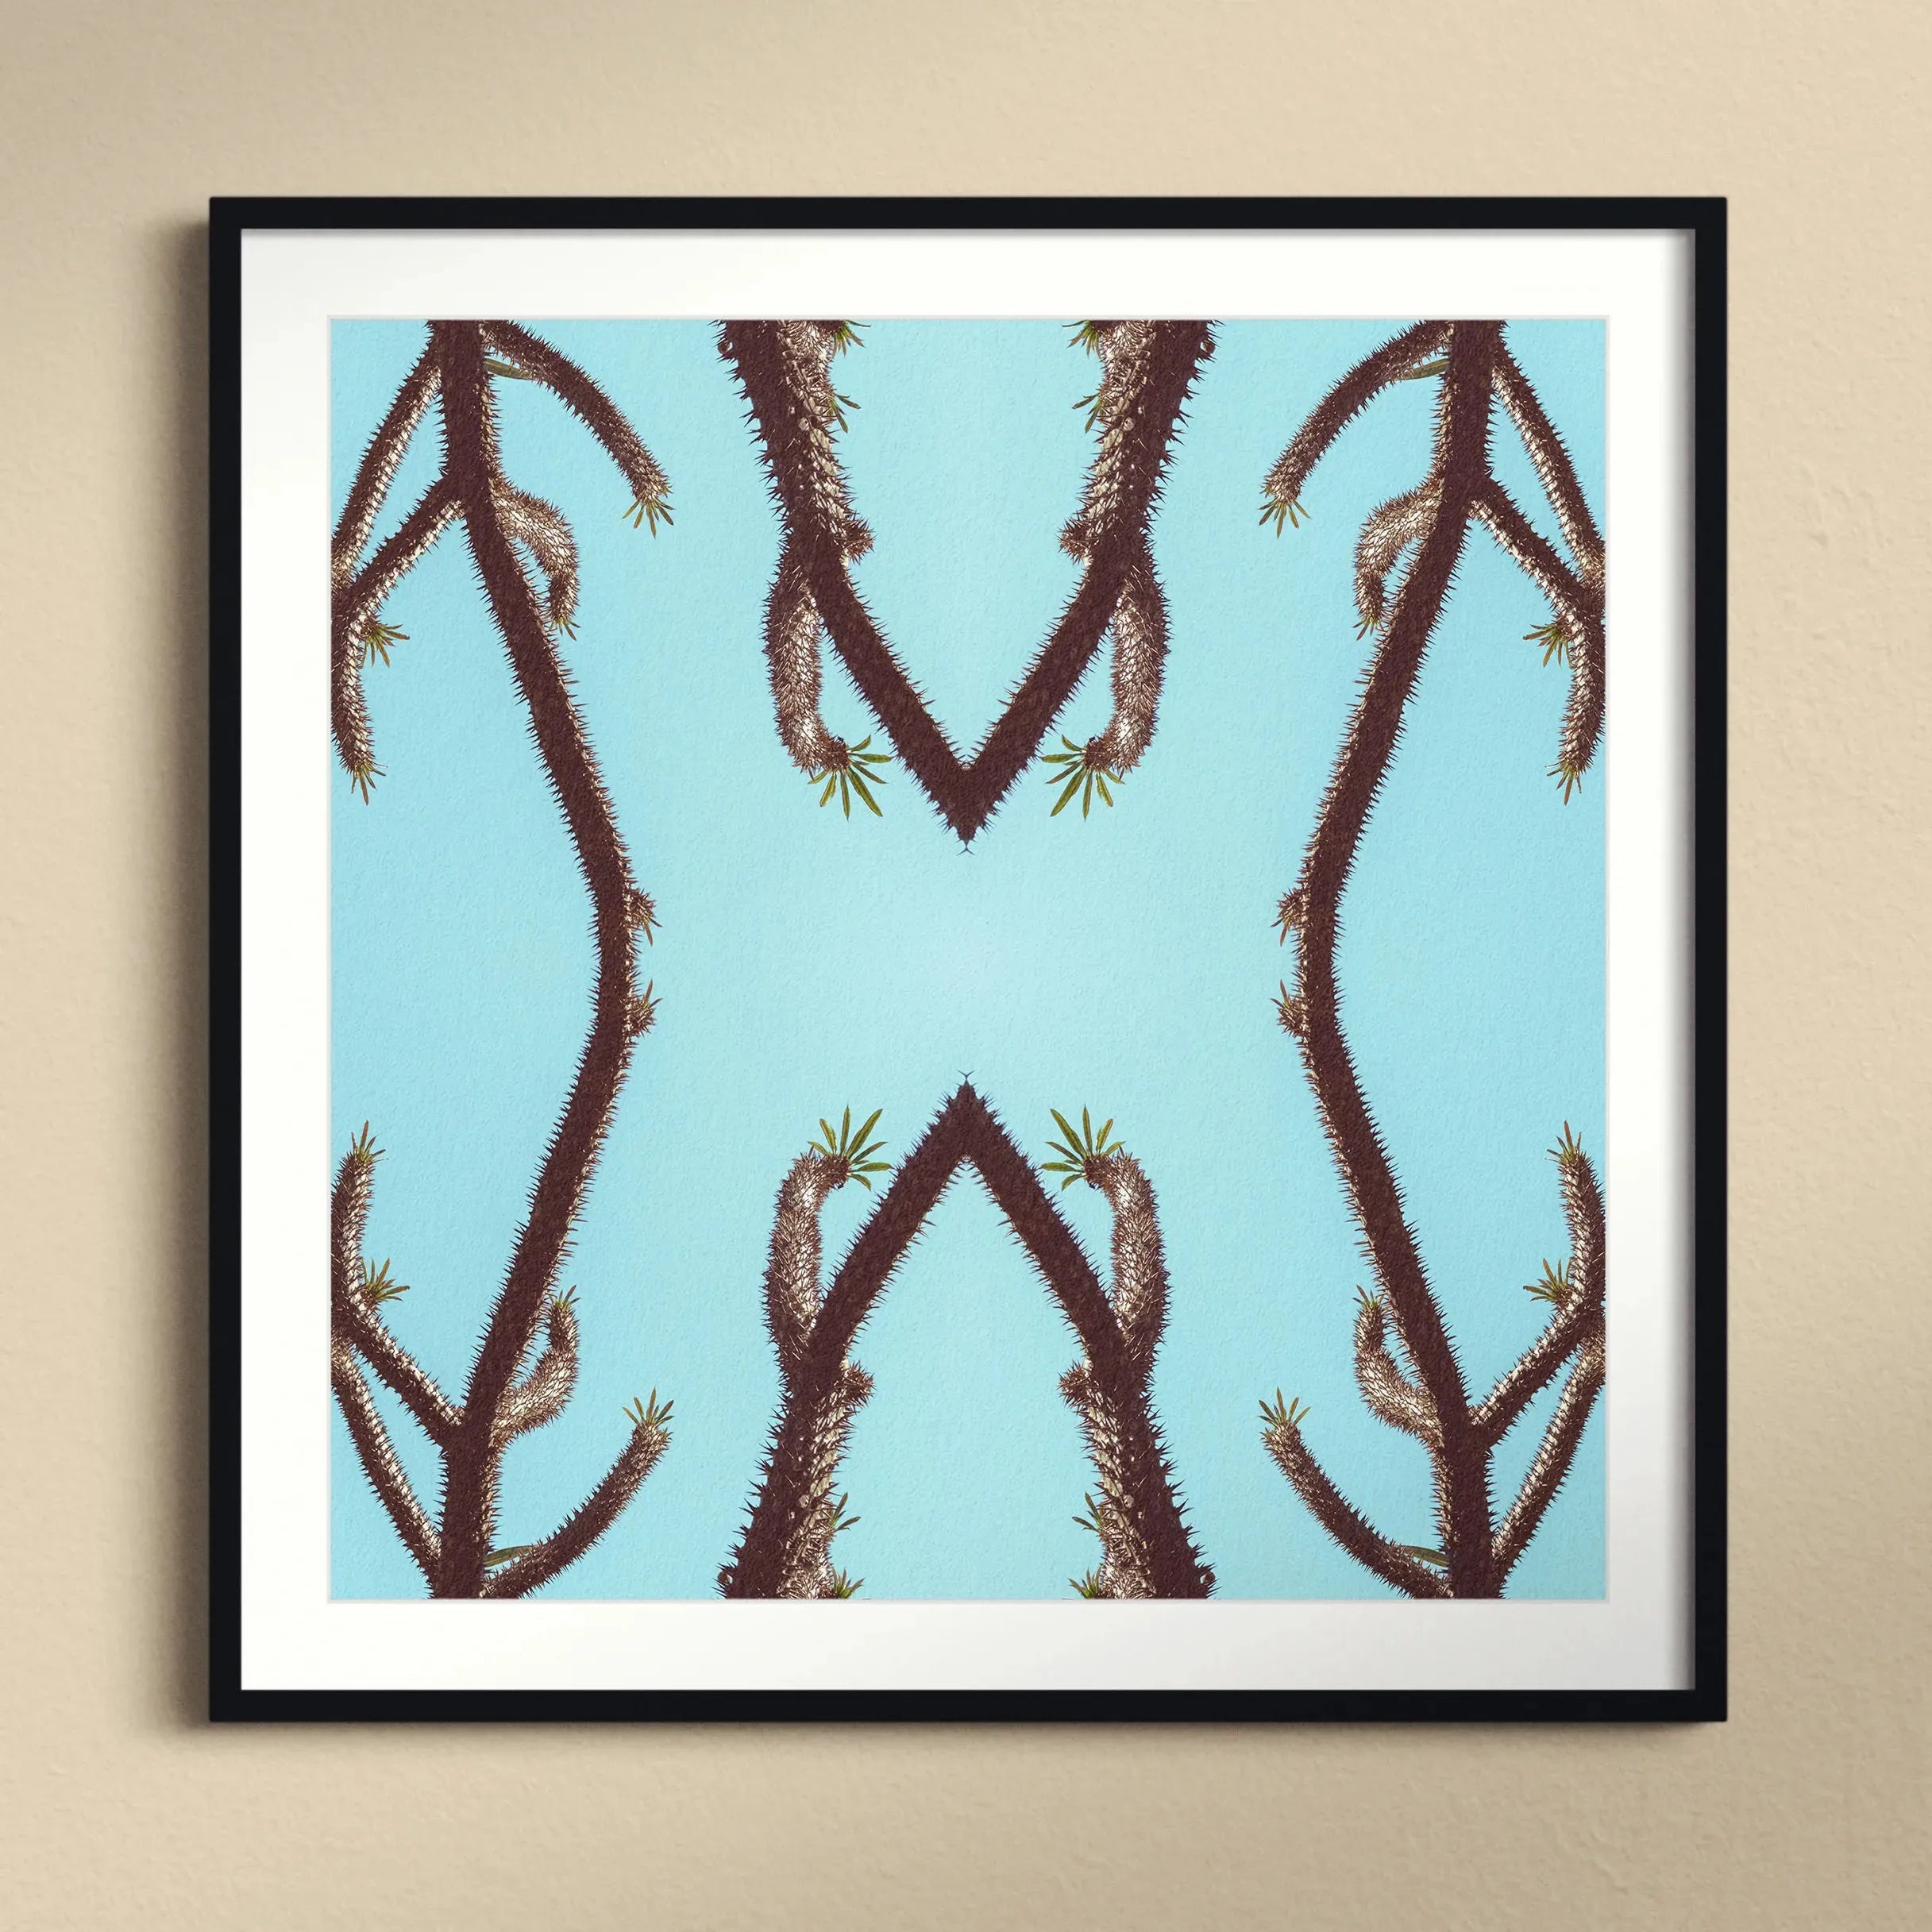 Chain Reaction Framed & Mounted Print - Posters Prints & Visual Artwork - Aesthetic Art